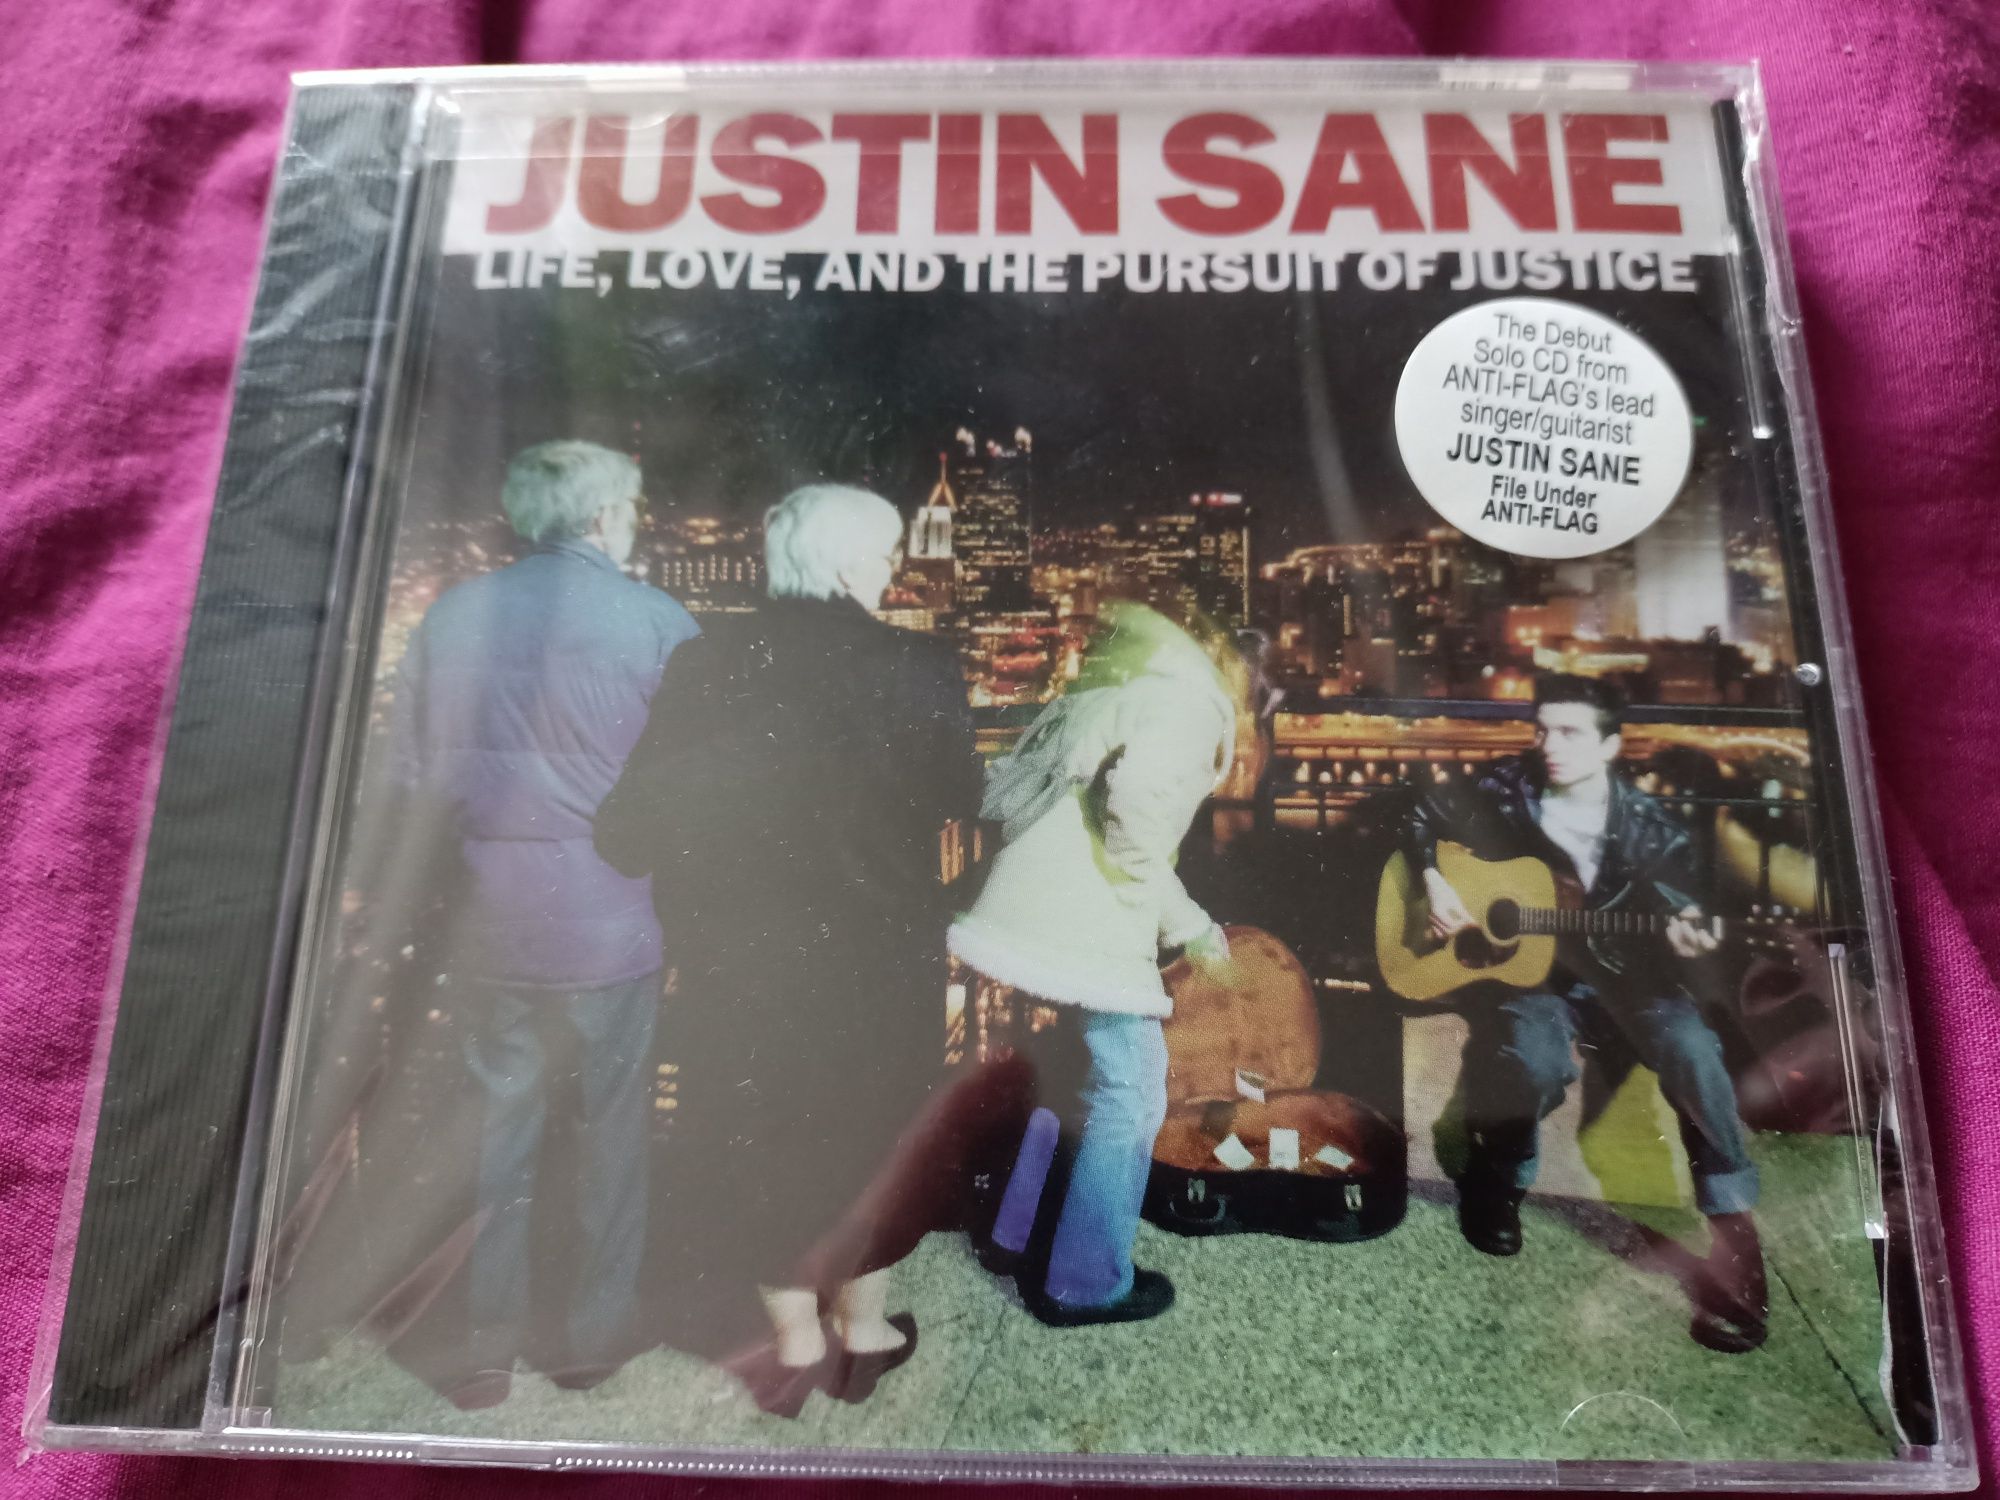 Justin Sane - Life, Love, And The Pursuit Of Justice (nowa w folii)